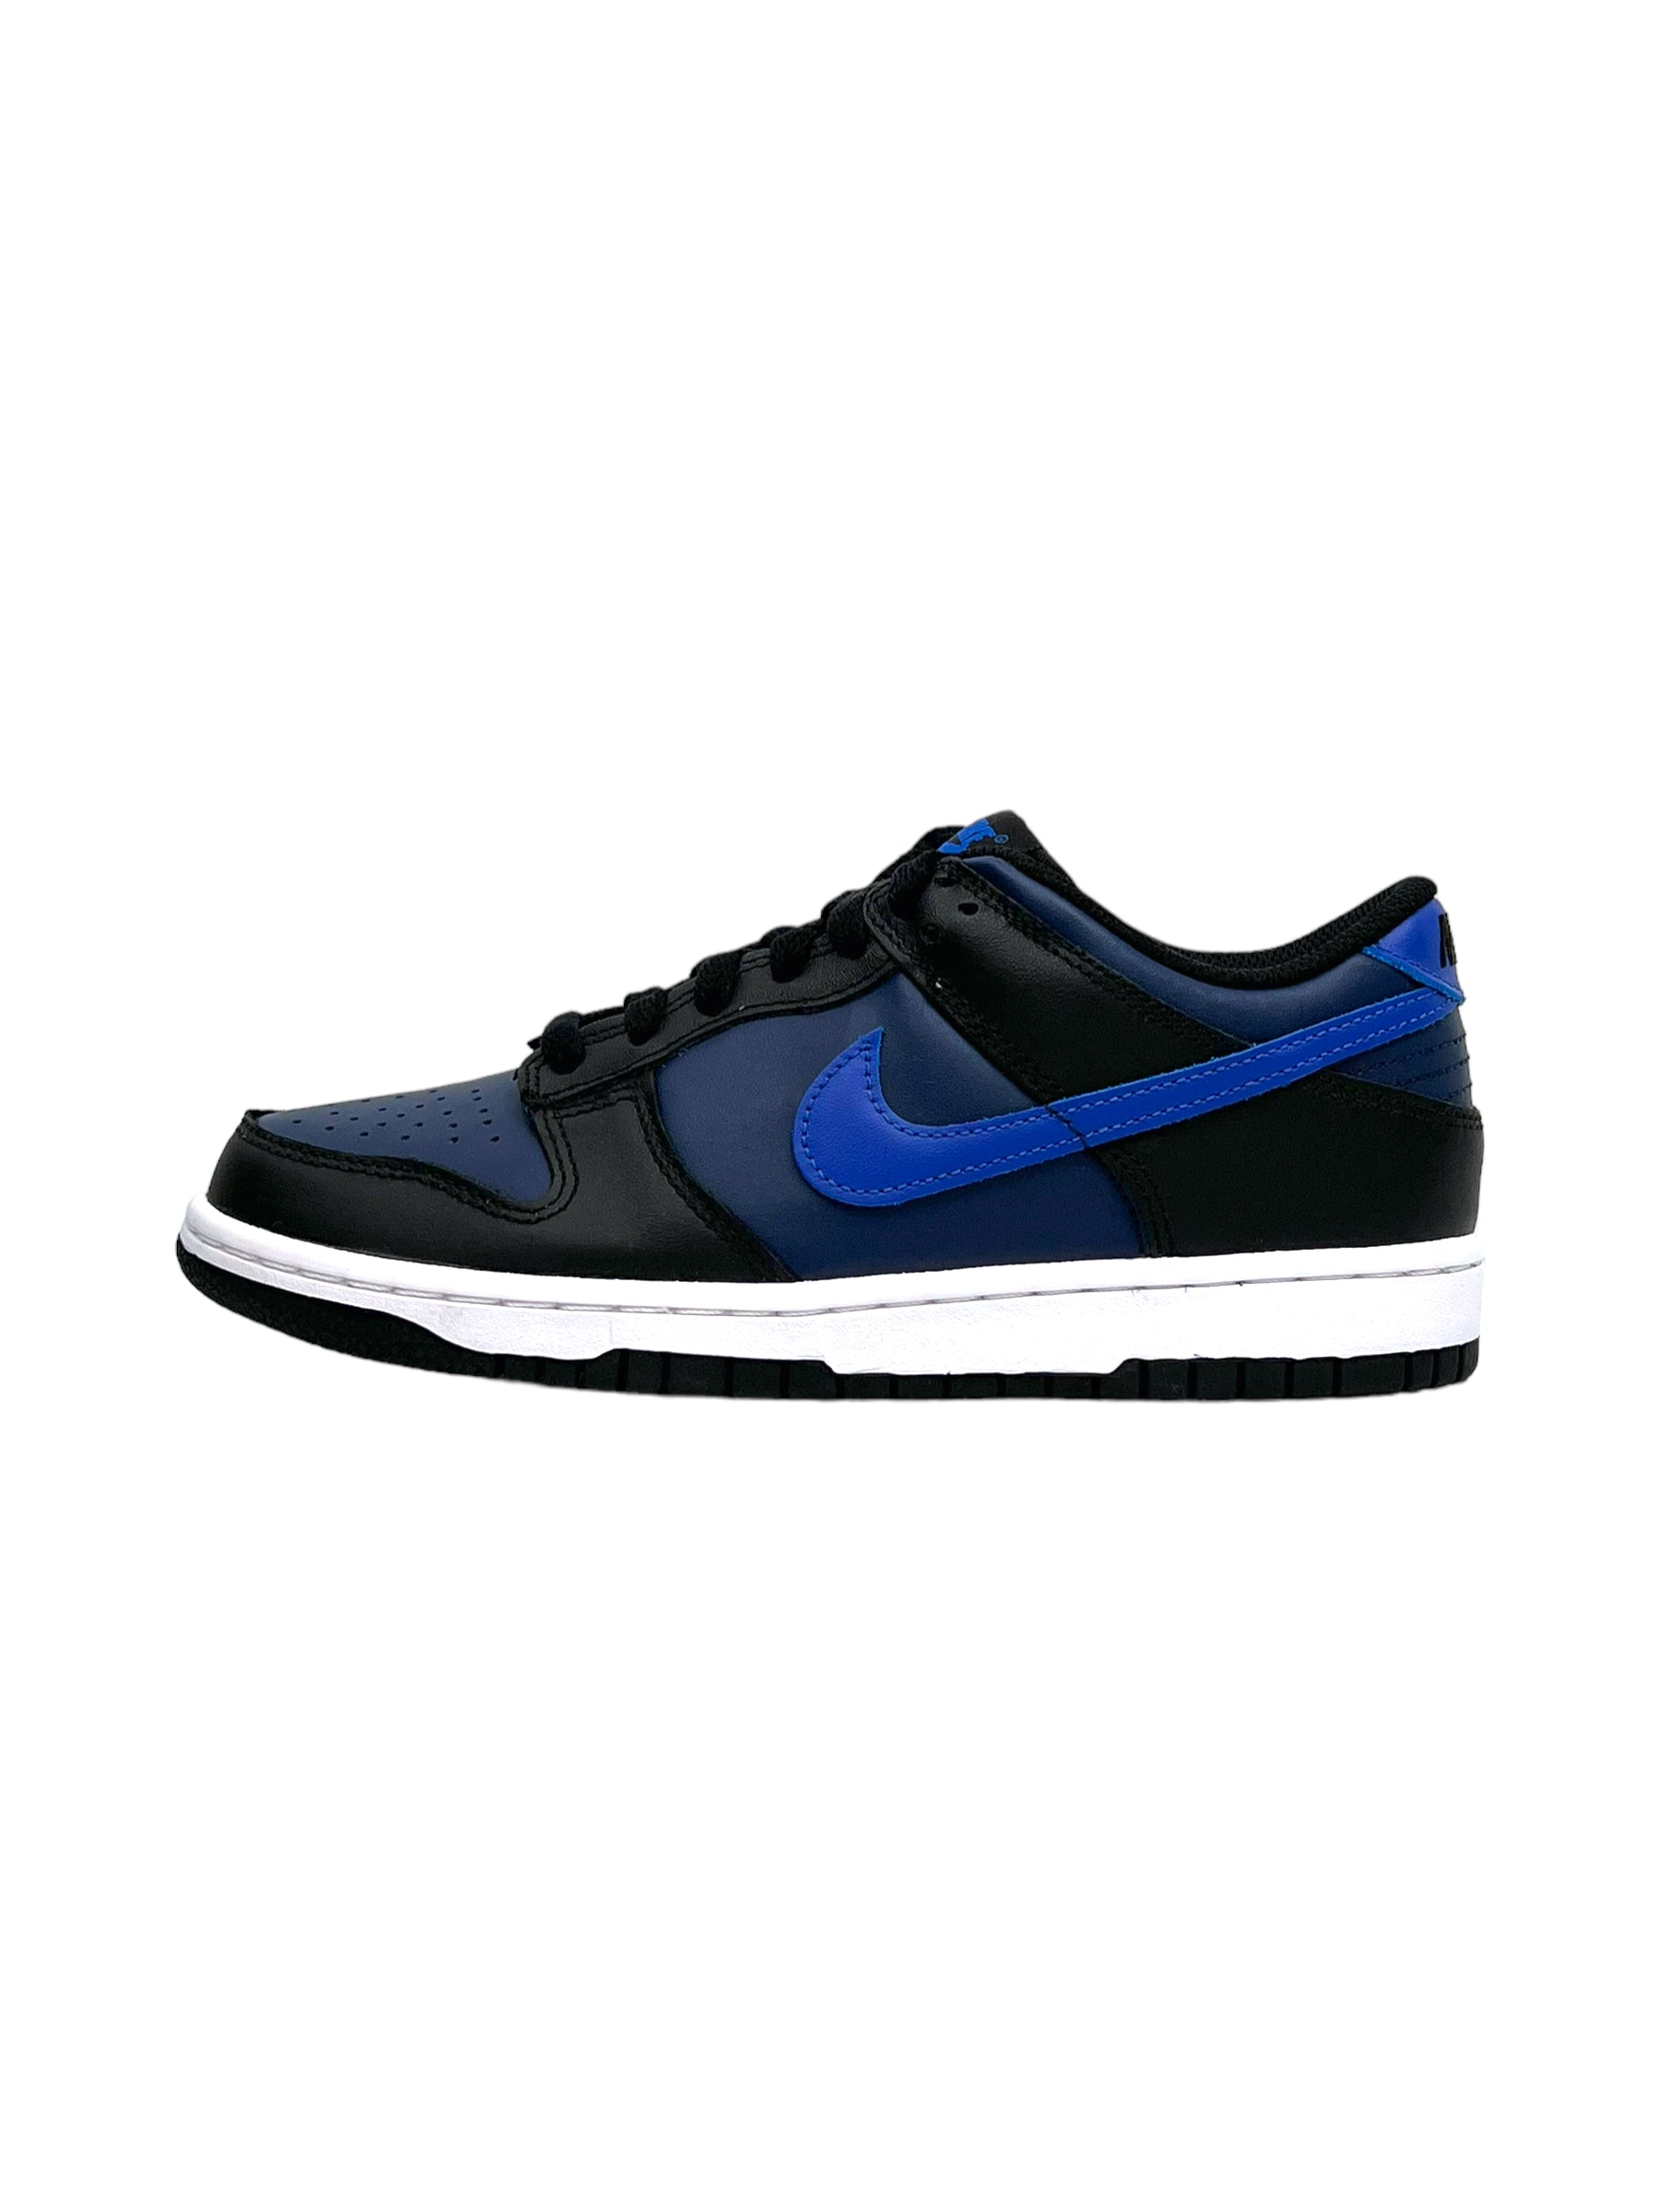 Nike Dunk Low Black Midnight Navy Sneakers - Genuine Design Luxury Consignment for Men. New & Pre-Owned Clothing, Shoes, & Accessories. Calgary, Canada